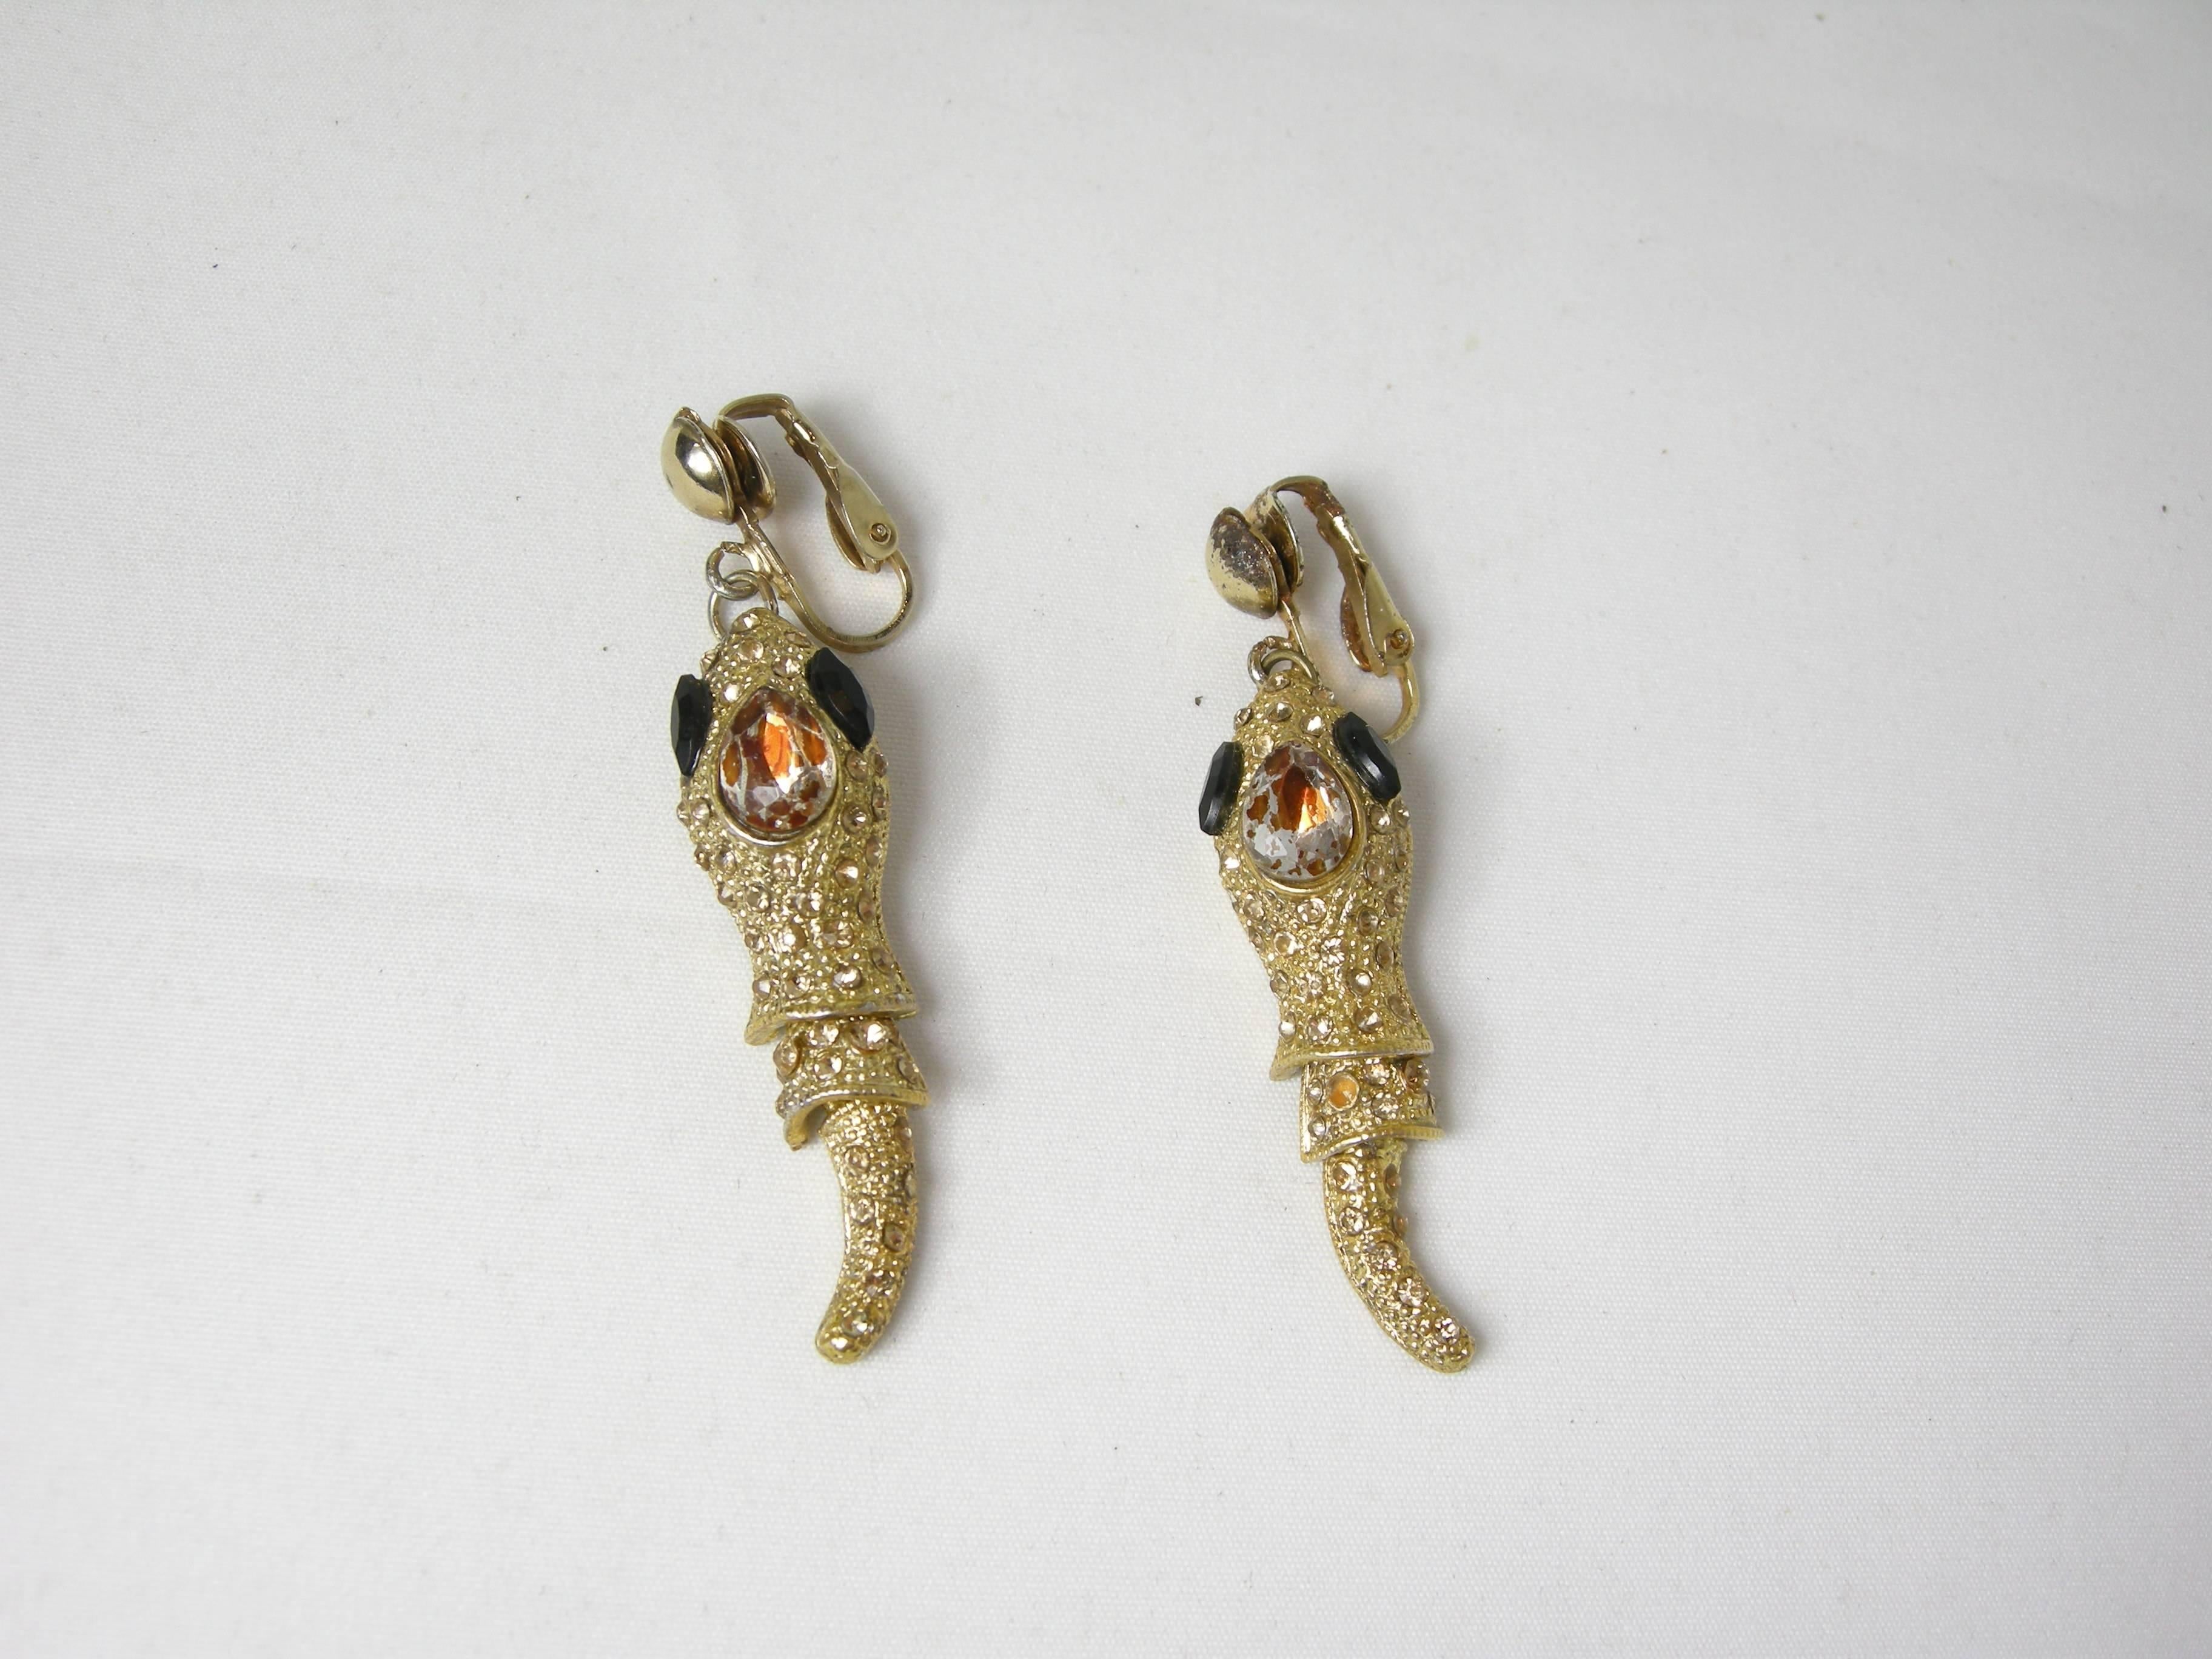 These 50s snake earrings Will charm you. They have brown crystals that look like chocolate diamonds and faux onyx for eyes. These clip ons measure 2¼”x ½” and have a gold tone setting. They are in excellent condition